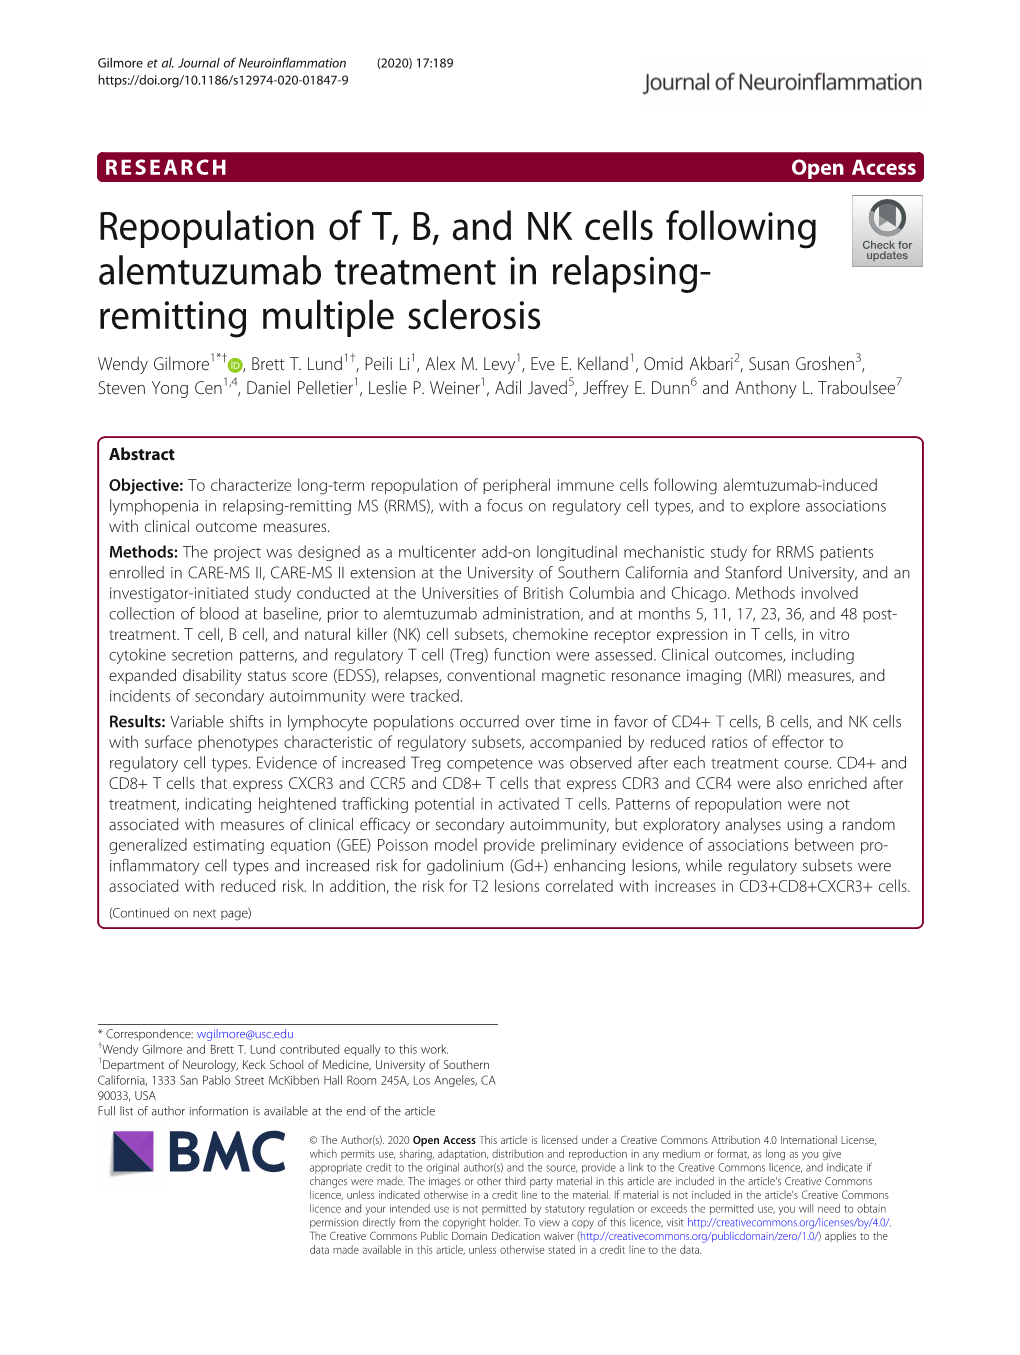 Repopulation of T, B, and NK Cells Following Alemtuzumab Treatment in Relapsing-Remitting Multiple Sclerosis